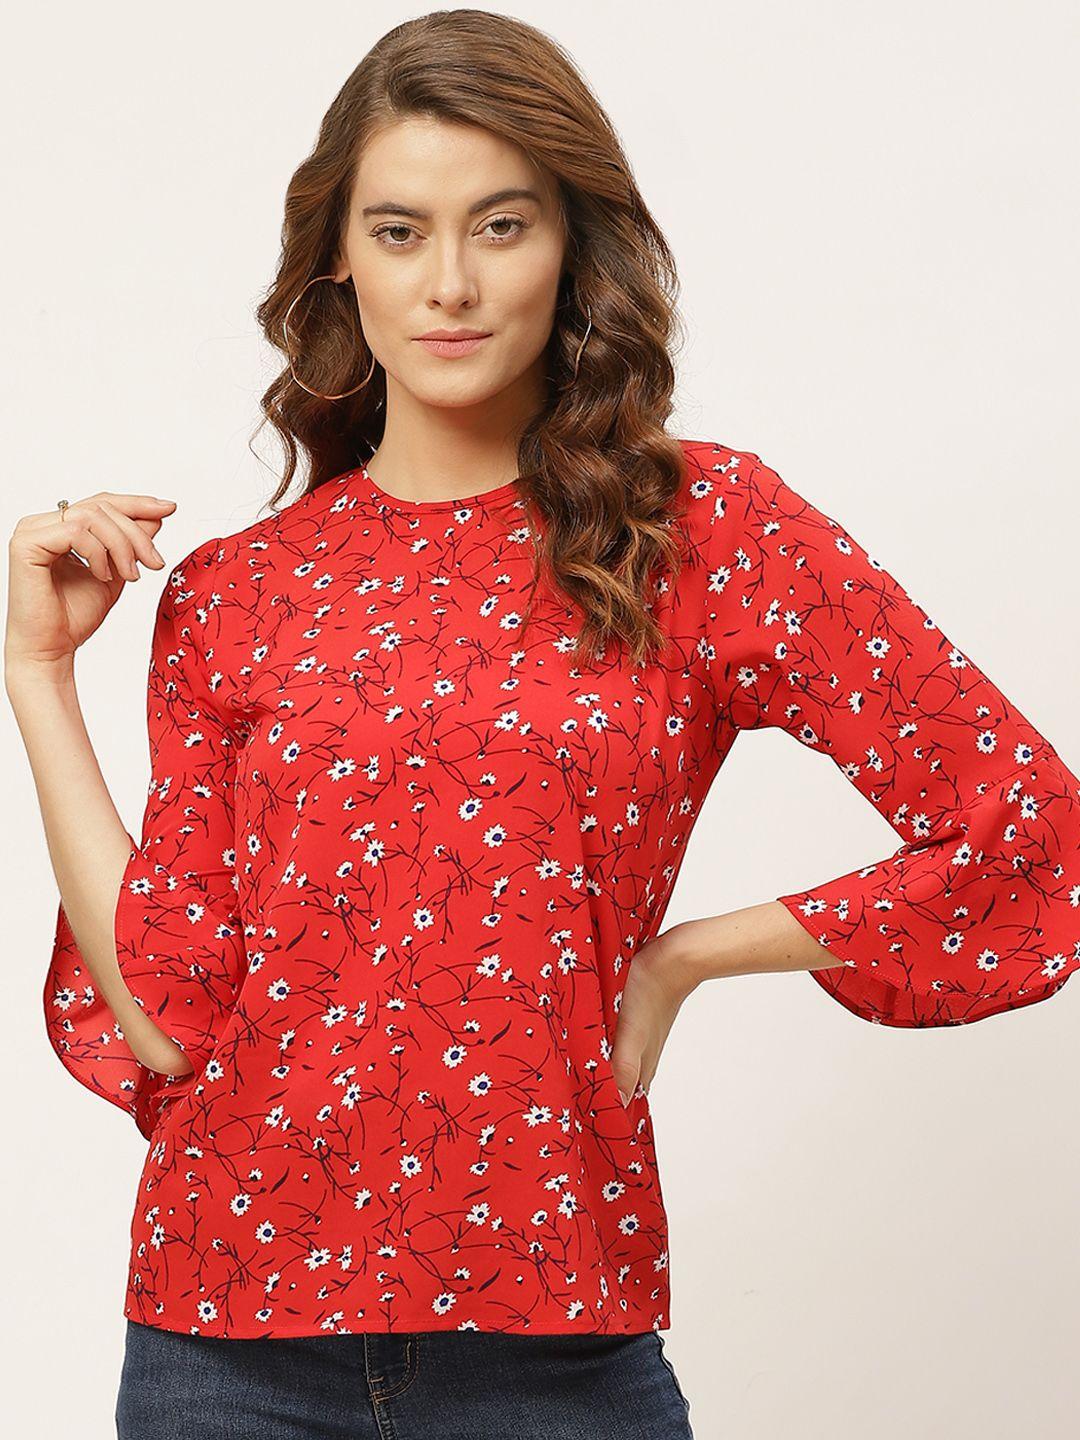 one-femme-red-&-white-floral-printed-bell-sleeves-crepe-regular-top